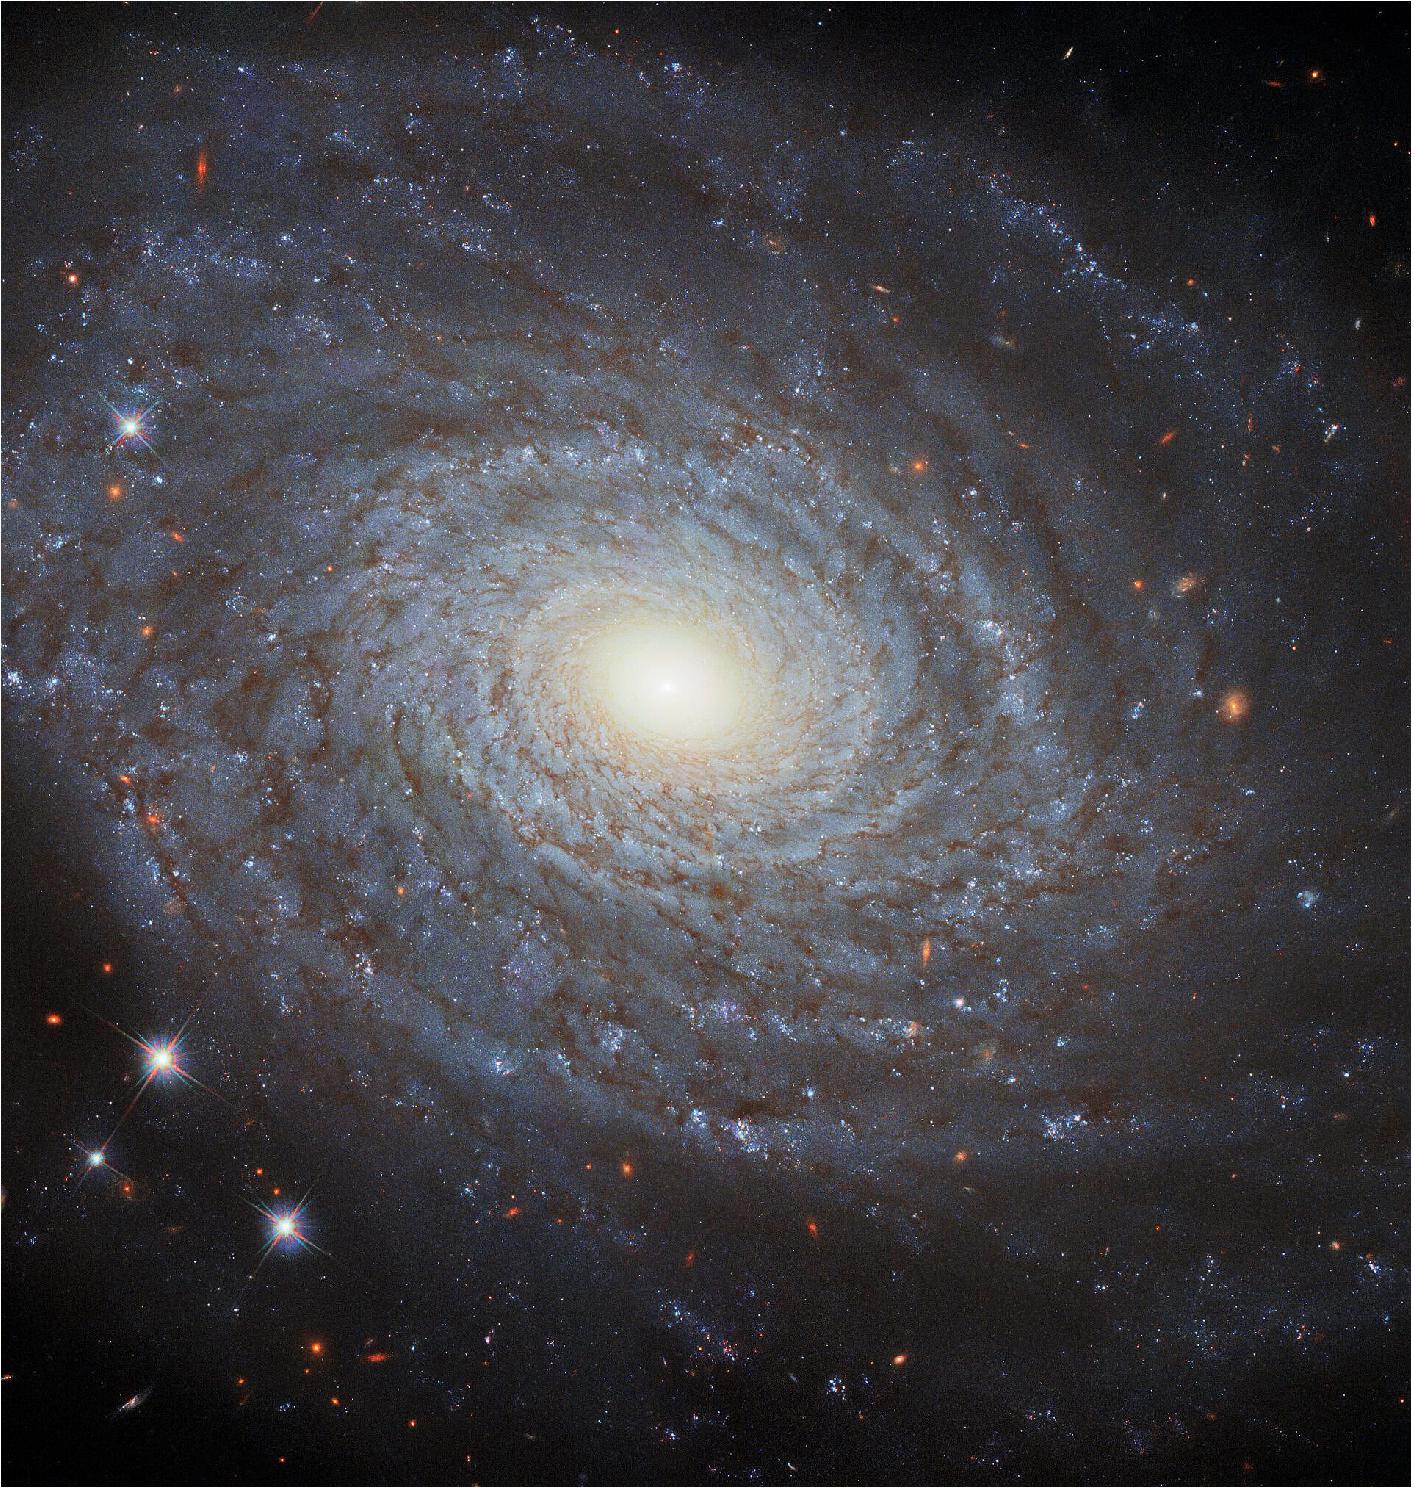 Figure 82: This image features the spiral galaxy NGC 691, imaged in fantastic detail by Hubble’s Wide Field Camera 3 (WFC3). This galaxy is the eponymous member of the NGC 691 galaxy group, a group of gravitationally bound galaxies that lie about 120 million light-years from Earth (image credit: ESA/Hubble & NASA, A. Riess; CC BY 4.0 Acknowledgement: M. Zamani)